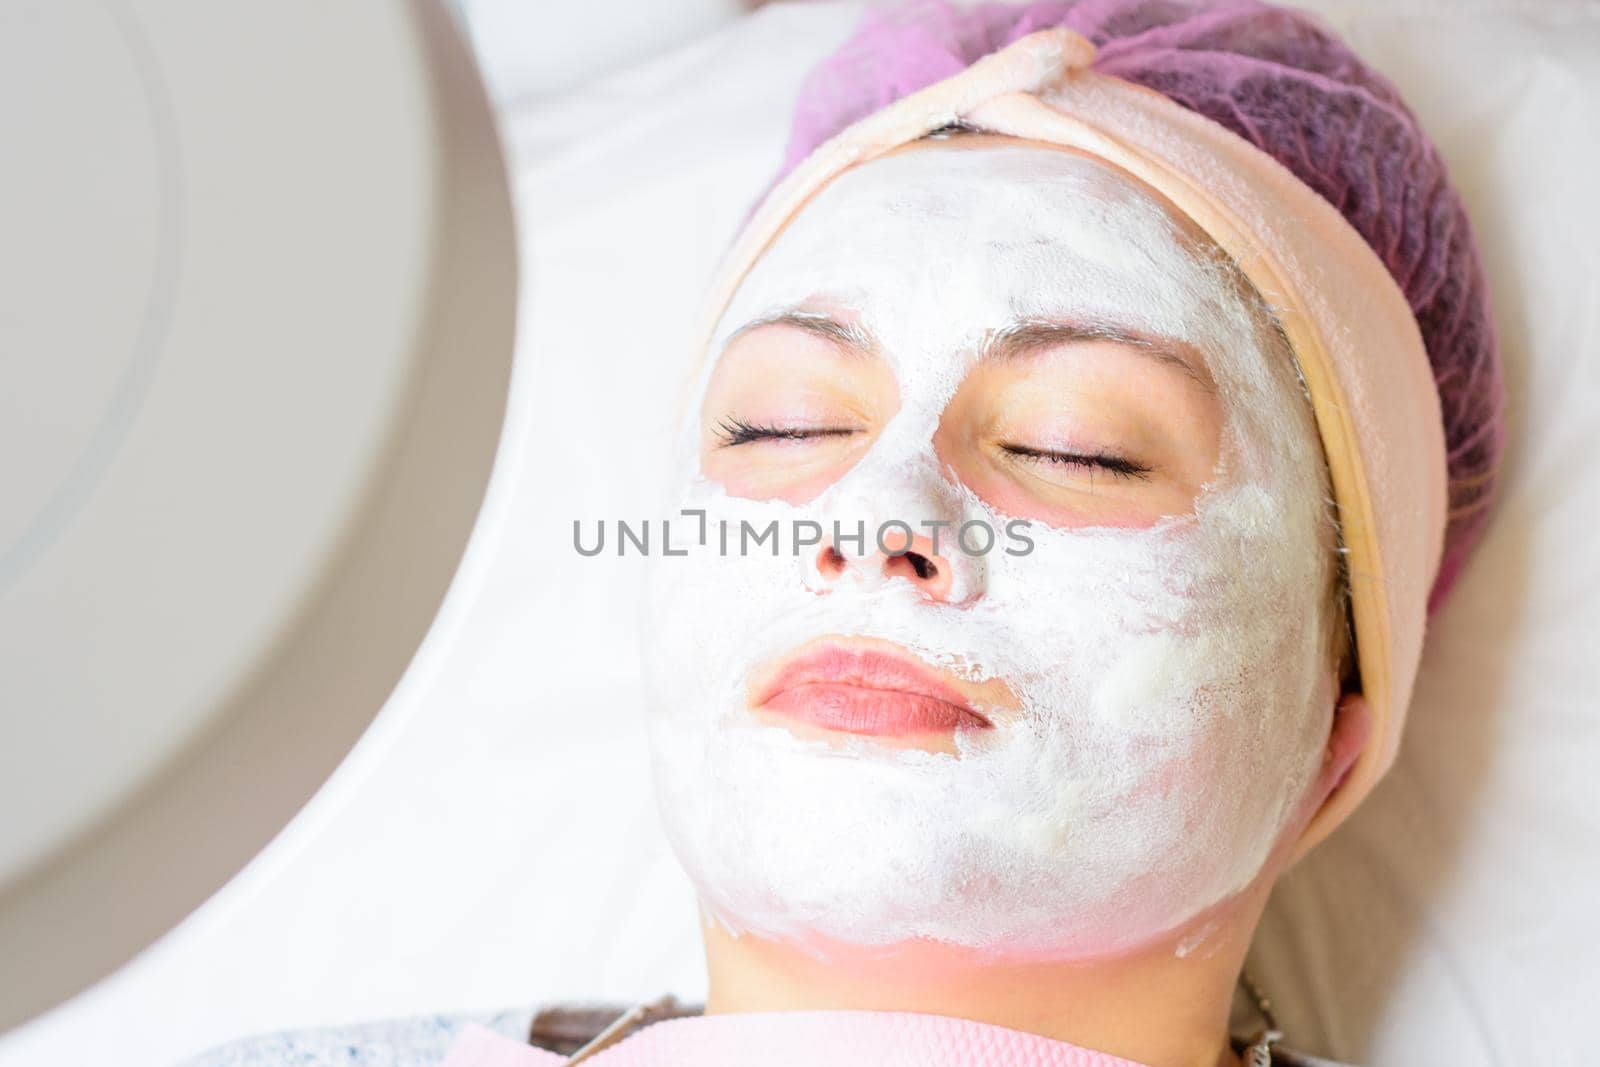 Applied to the face white cooling mask, a mask to narrow pores after cleansing the face. new